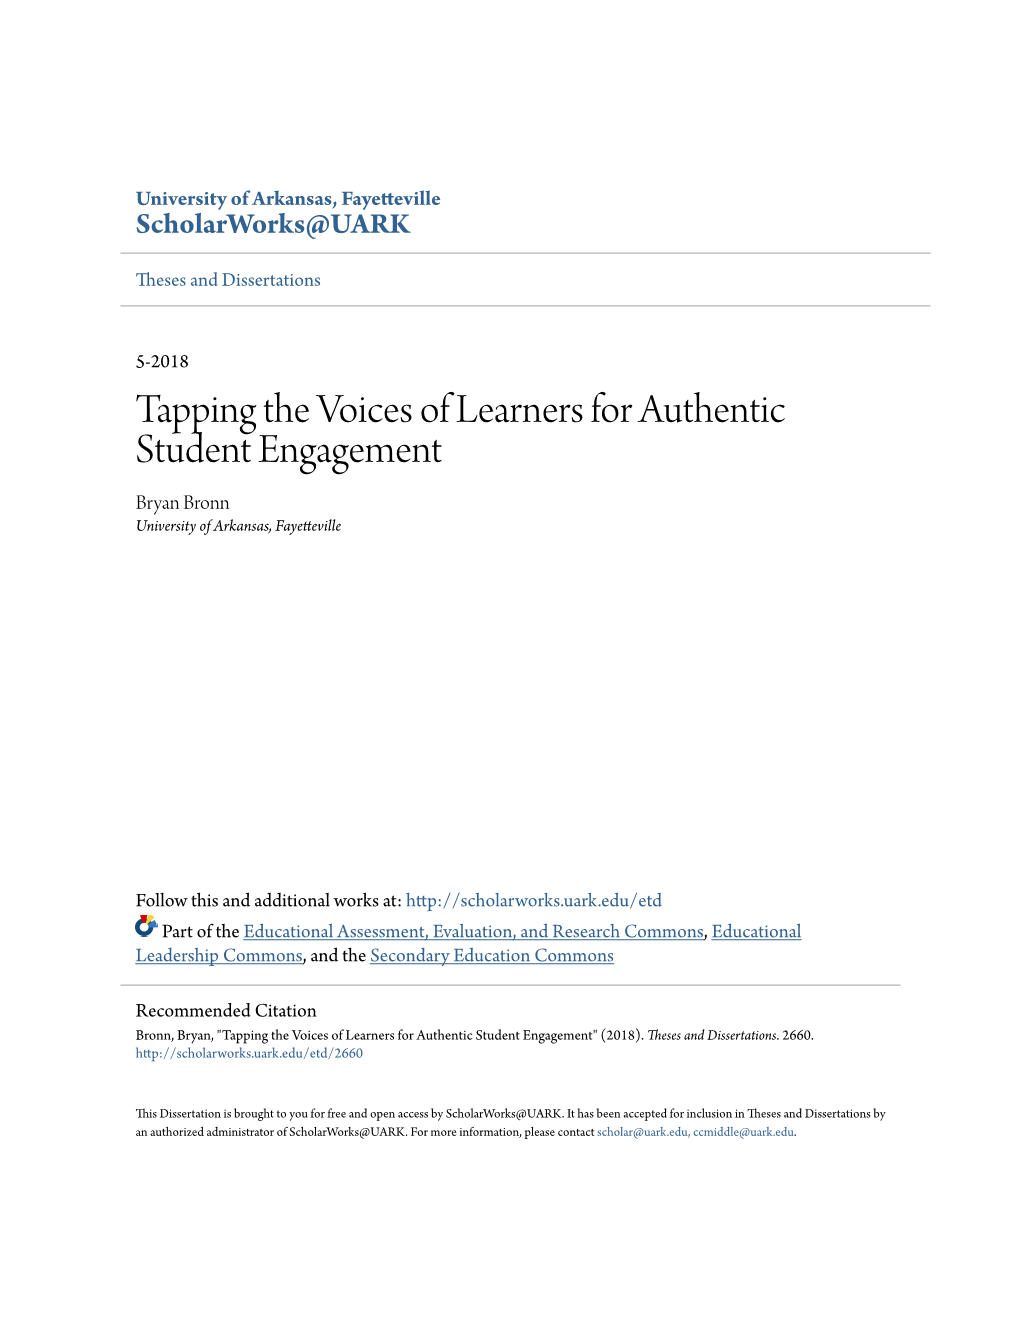 Tapping the Voices of Learners for Authentic Student Engagement Bryan Bronn University of Arkansas, Fayetteville